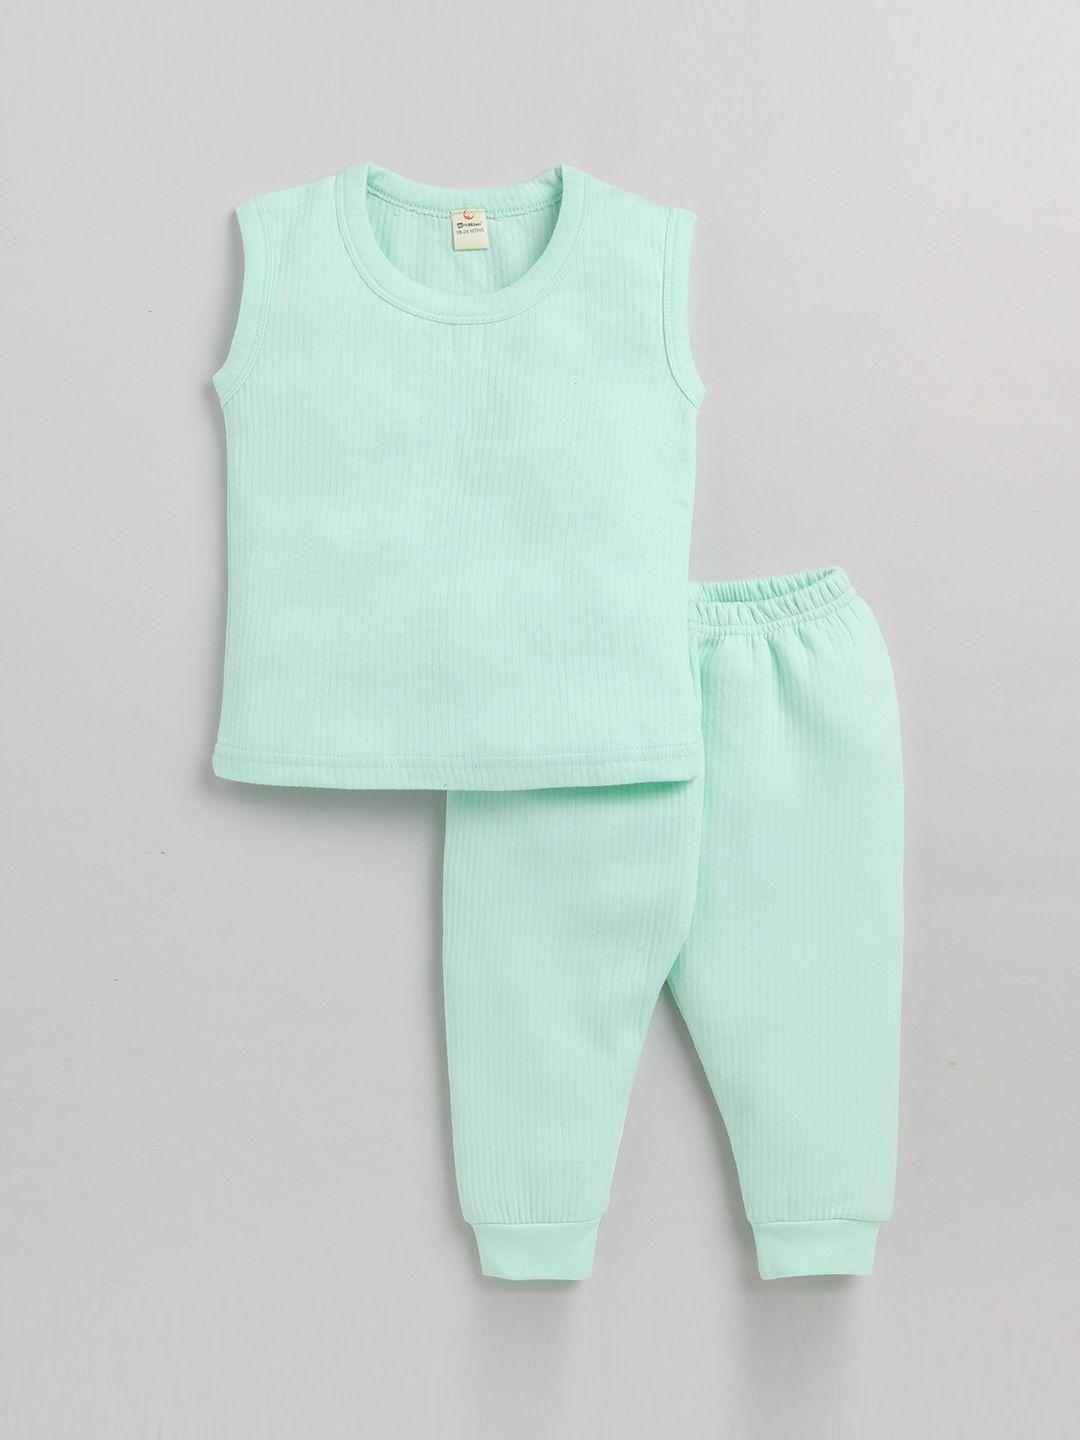 moonkids infant boys green thermal set